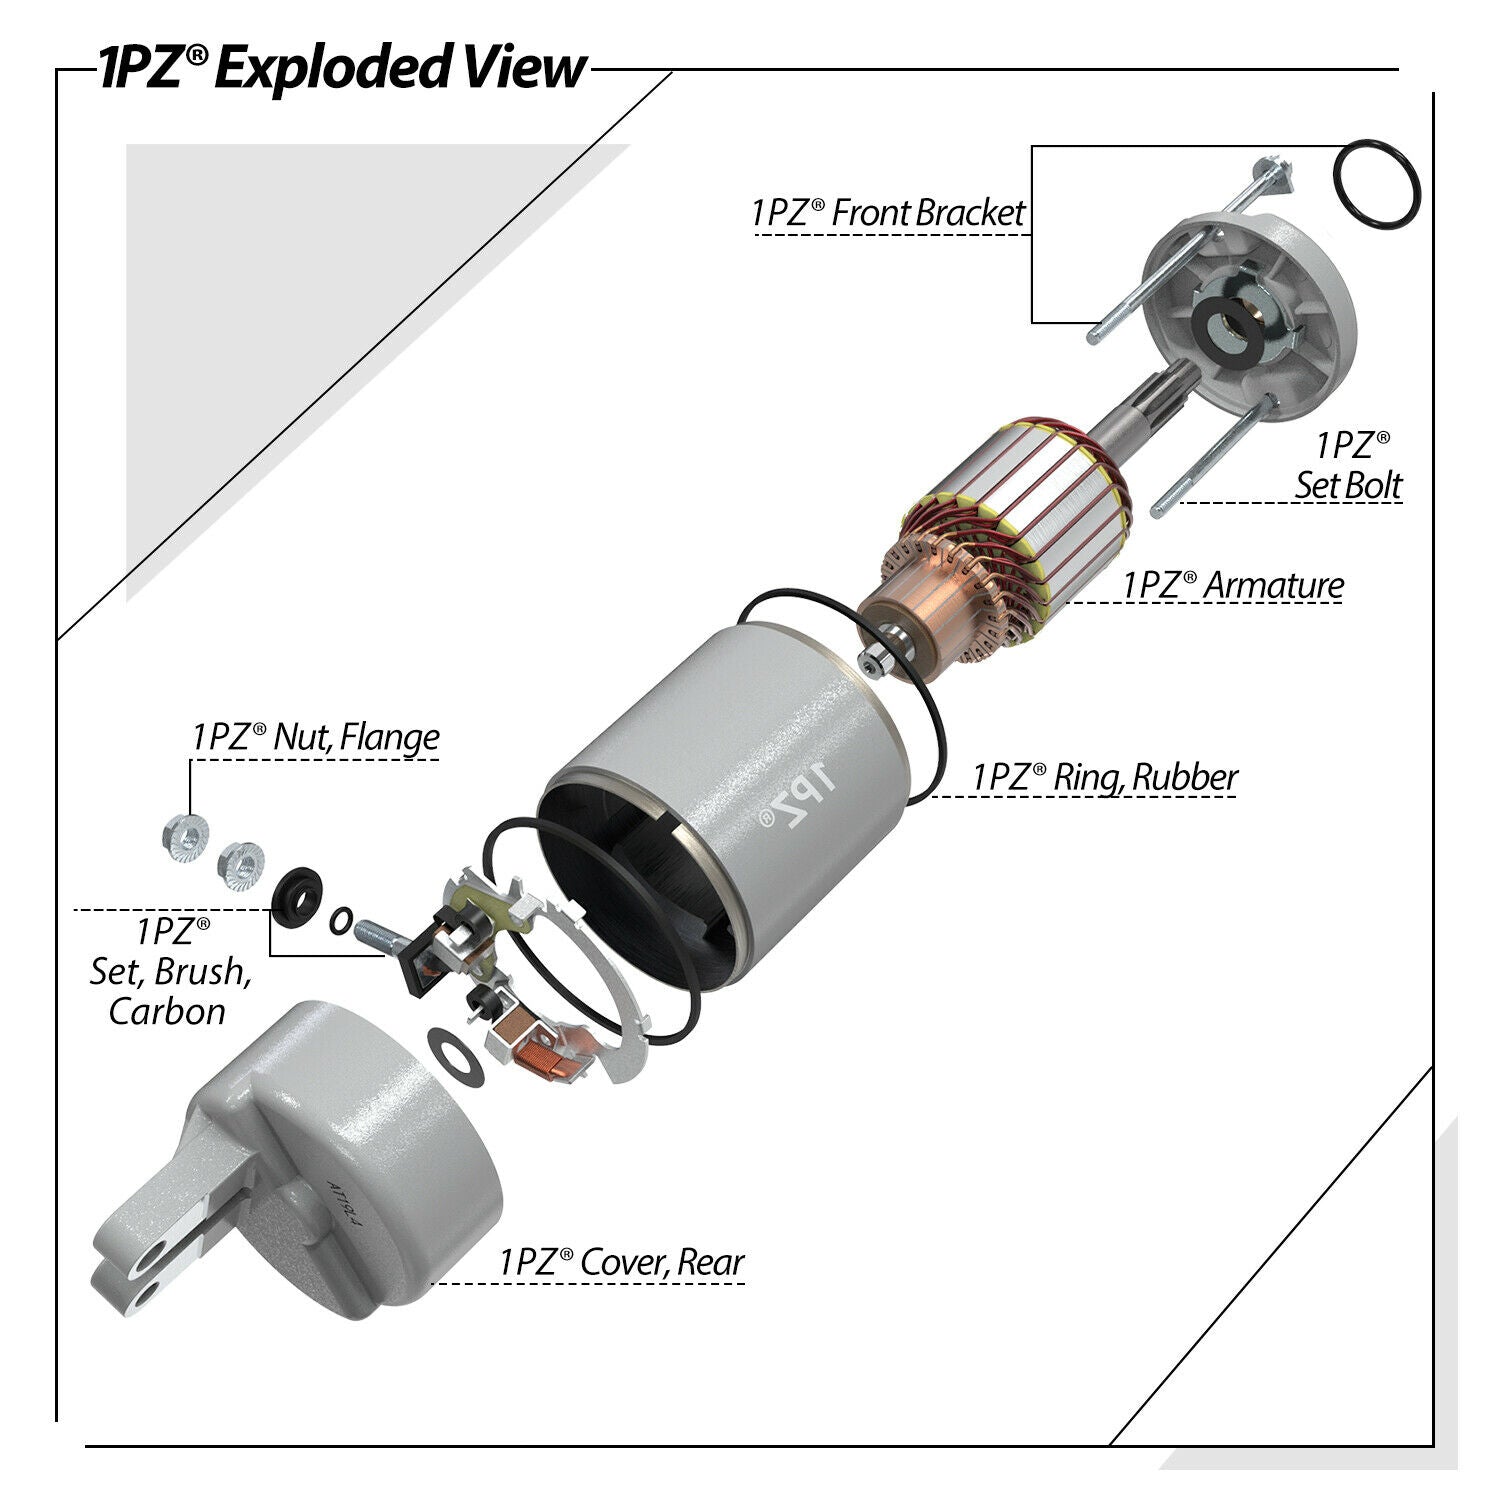 1PZ Starter Motor Replacement for Honda Foreman TRX 400 450 500 FourTrax 400 31200-HM7-003 31200-HM7-A41